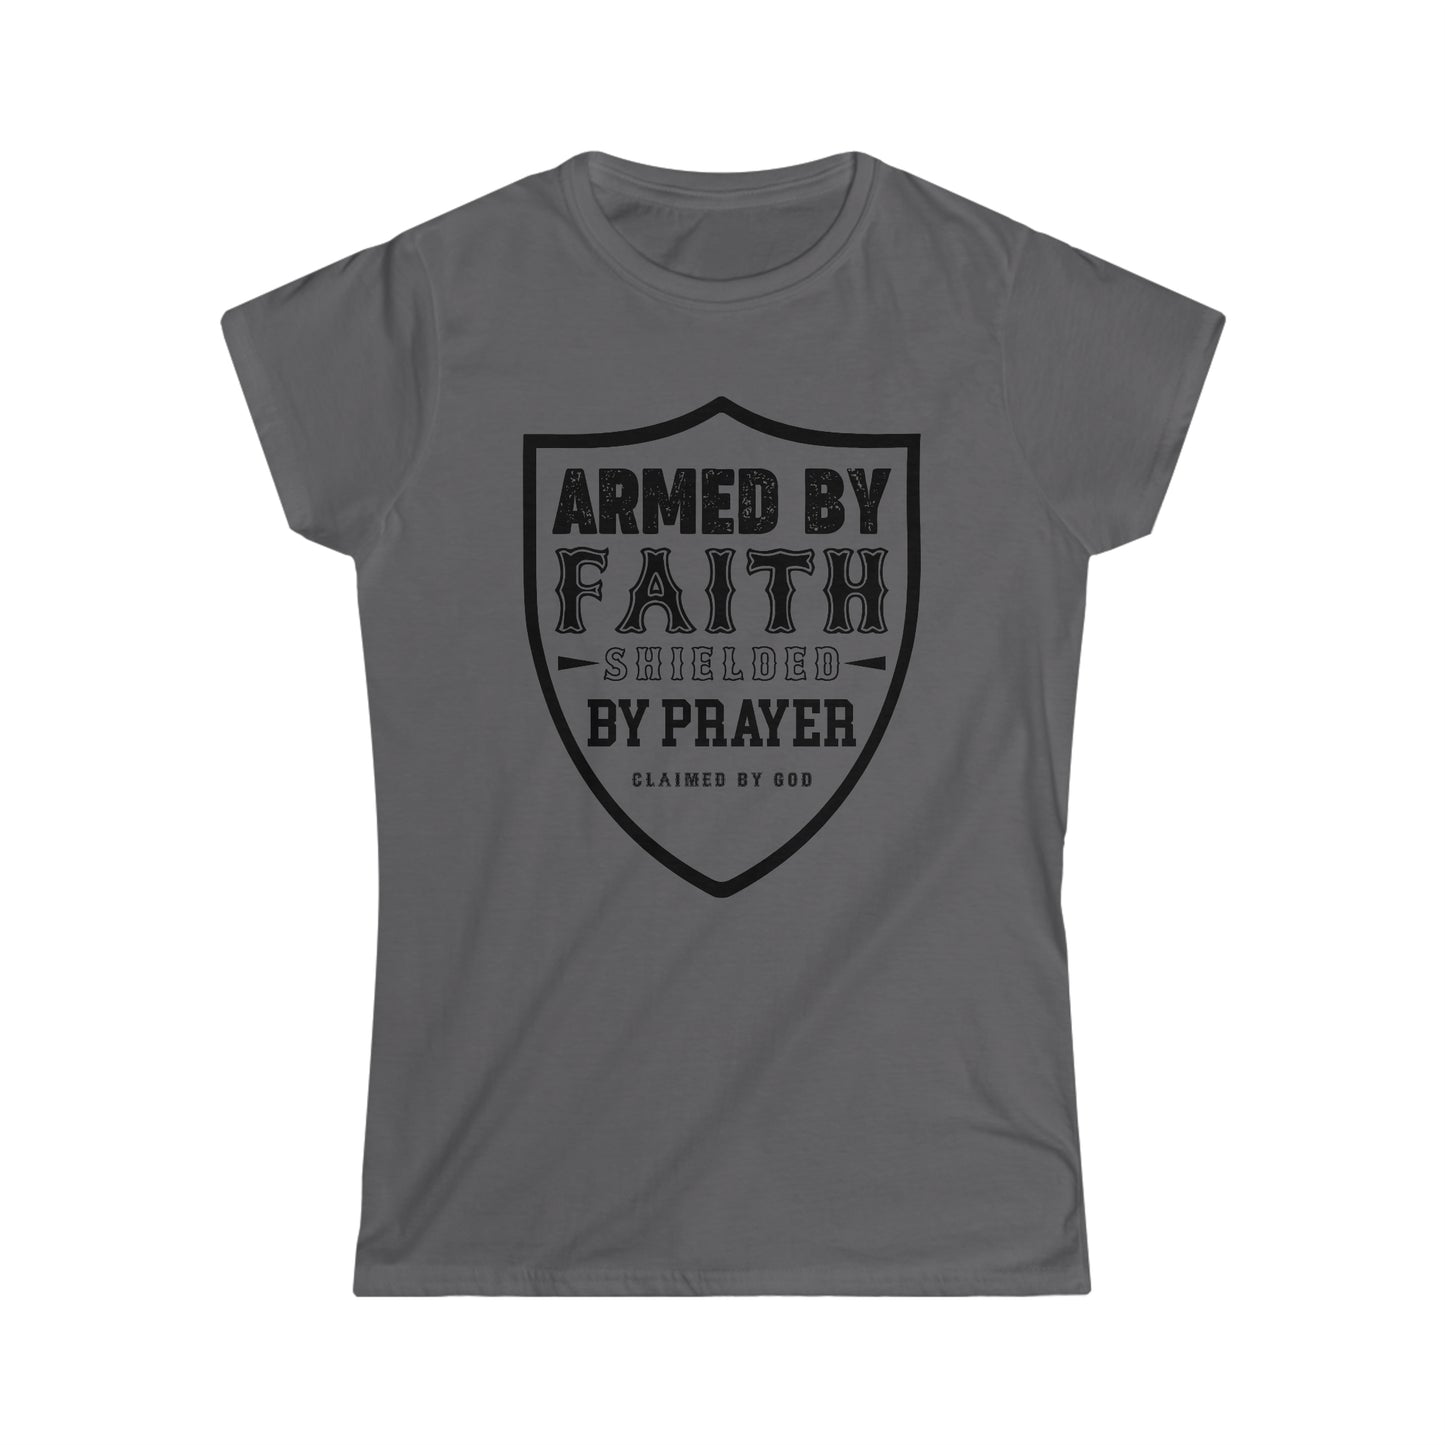 Armed by faith shielded by prayer Women's T-shirt